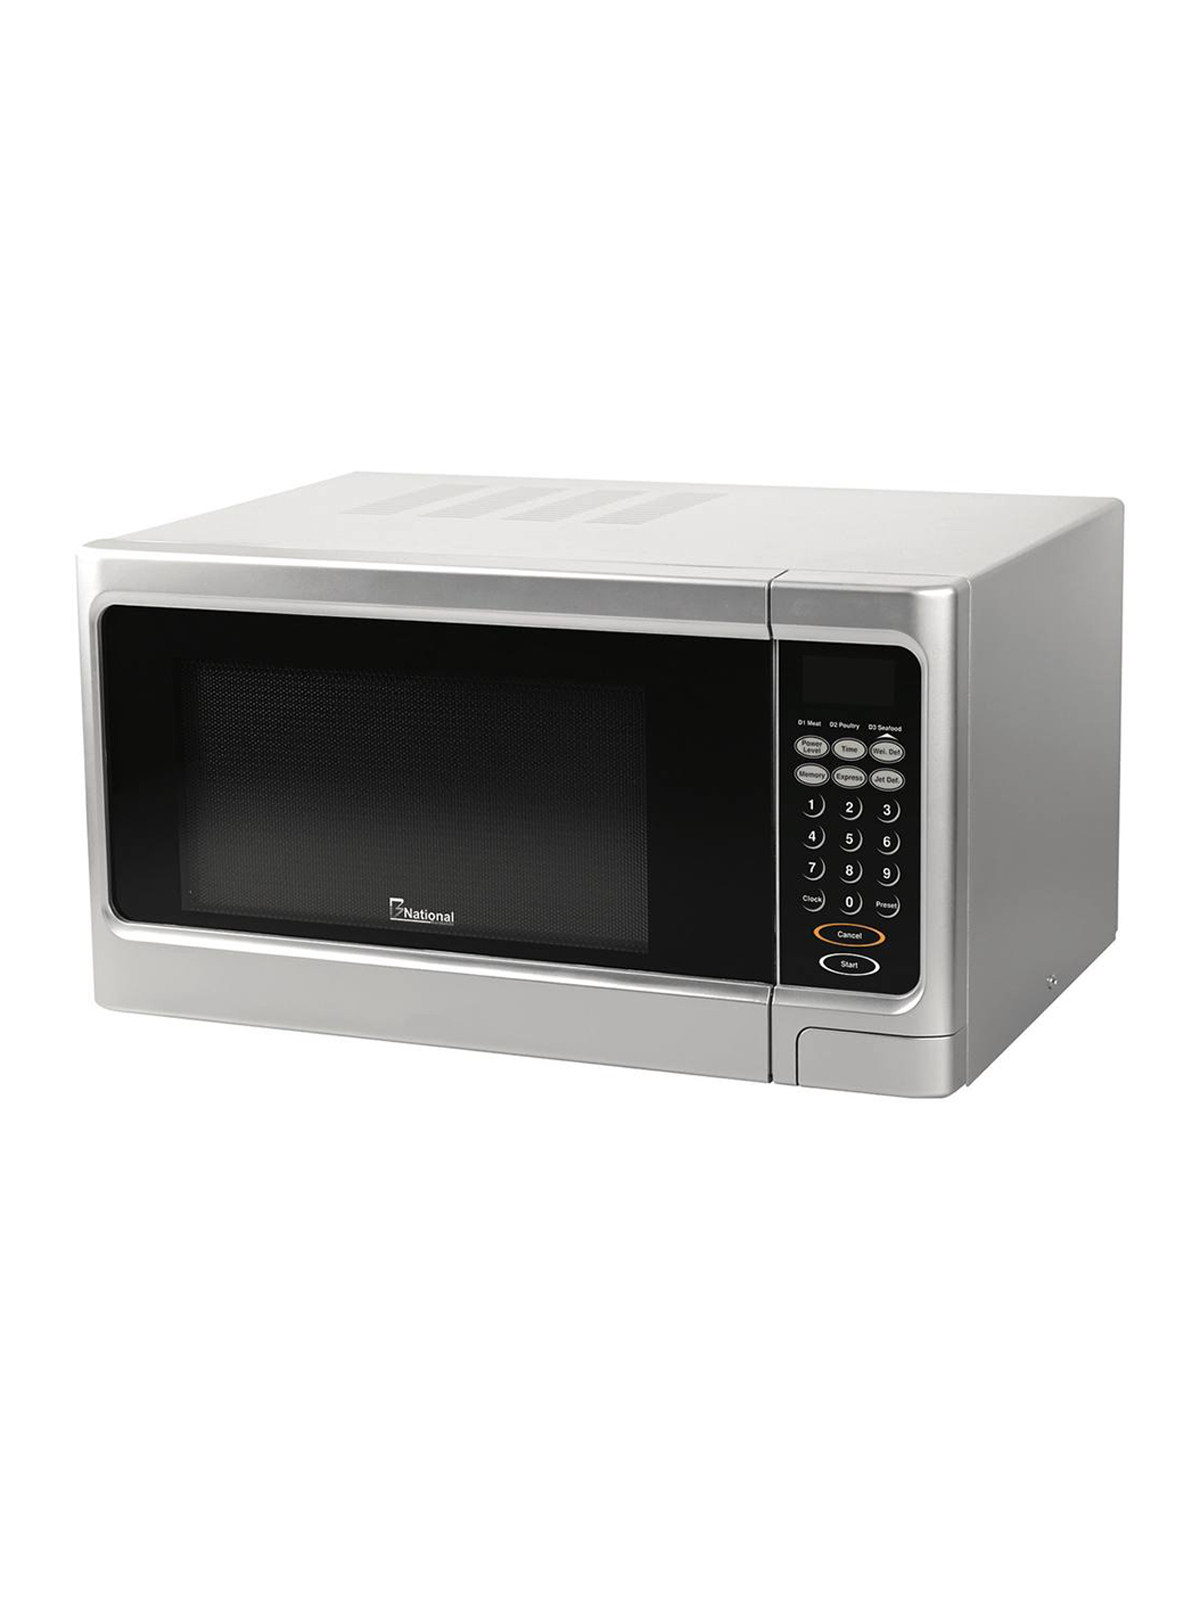 B National microwave oven 40-liter